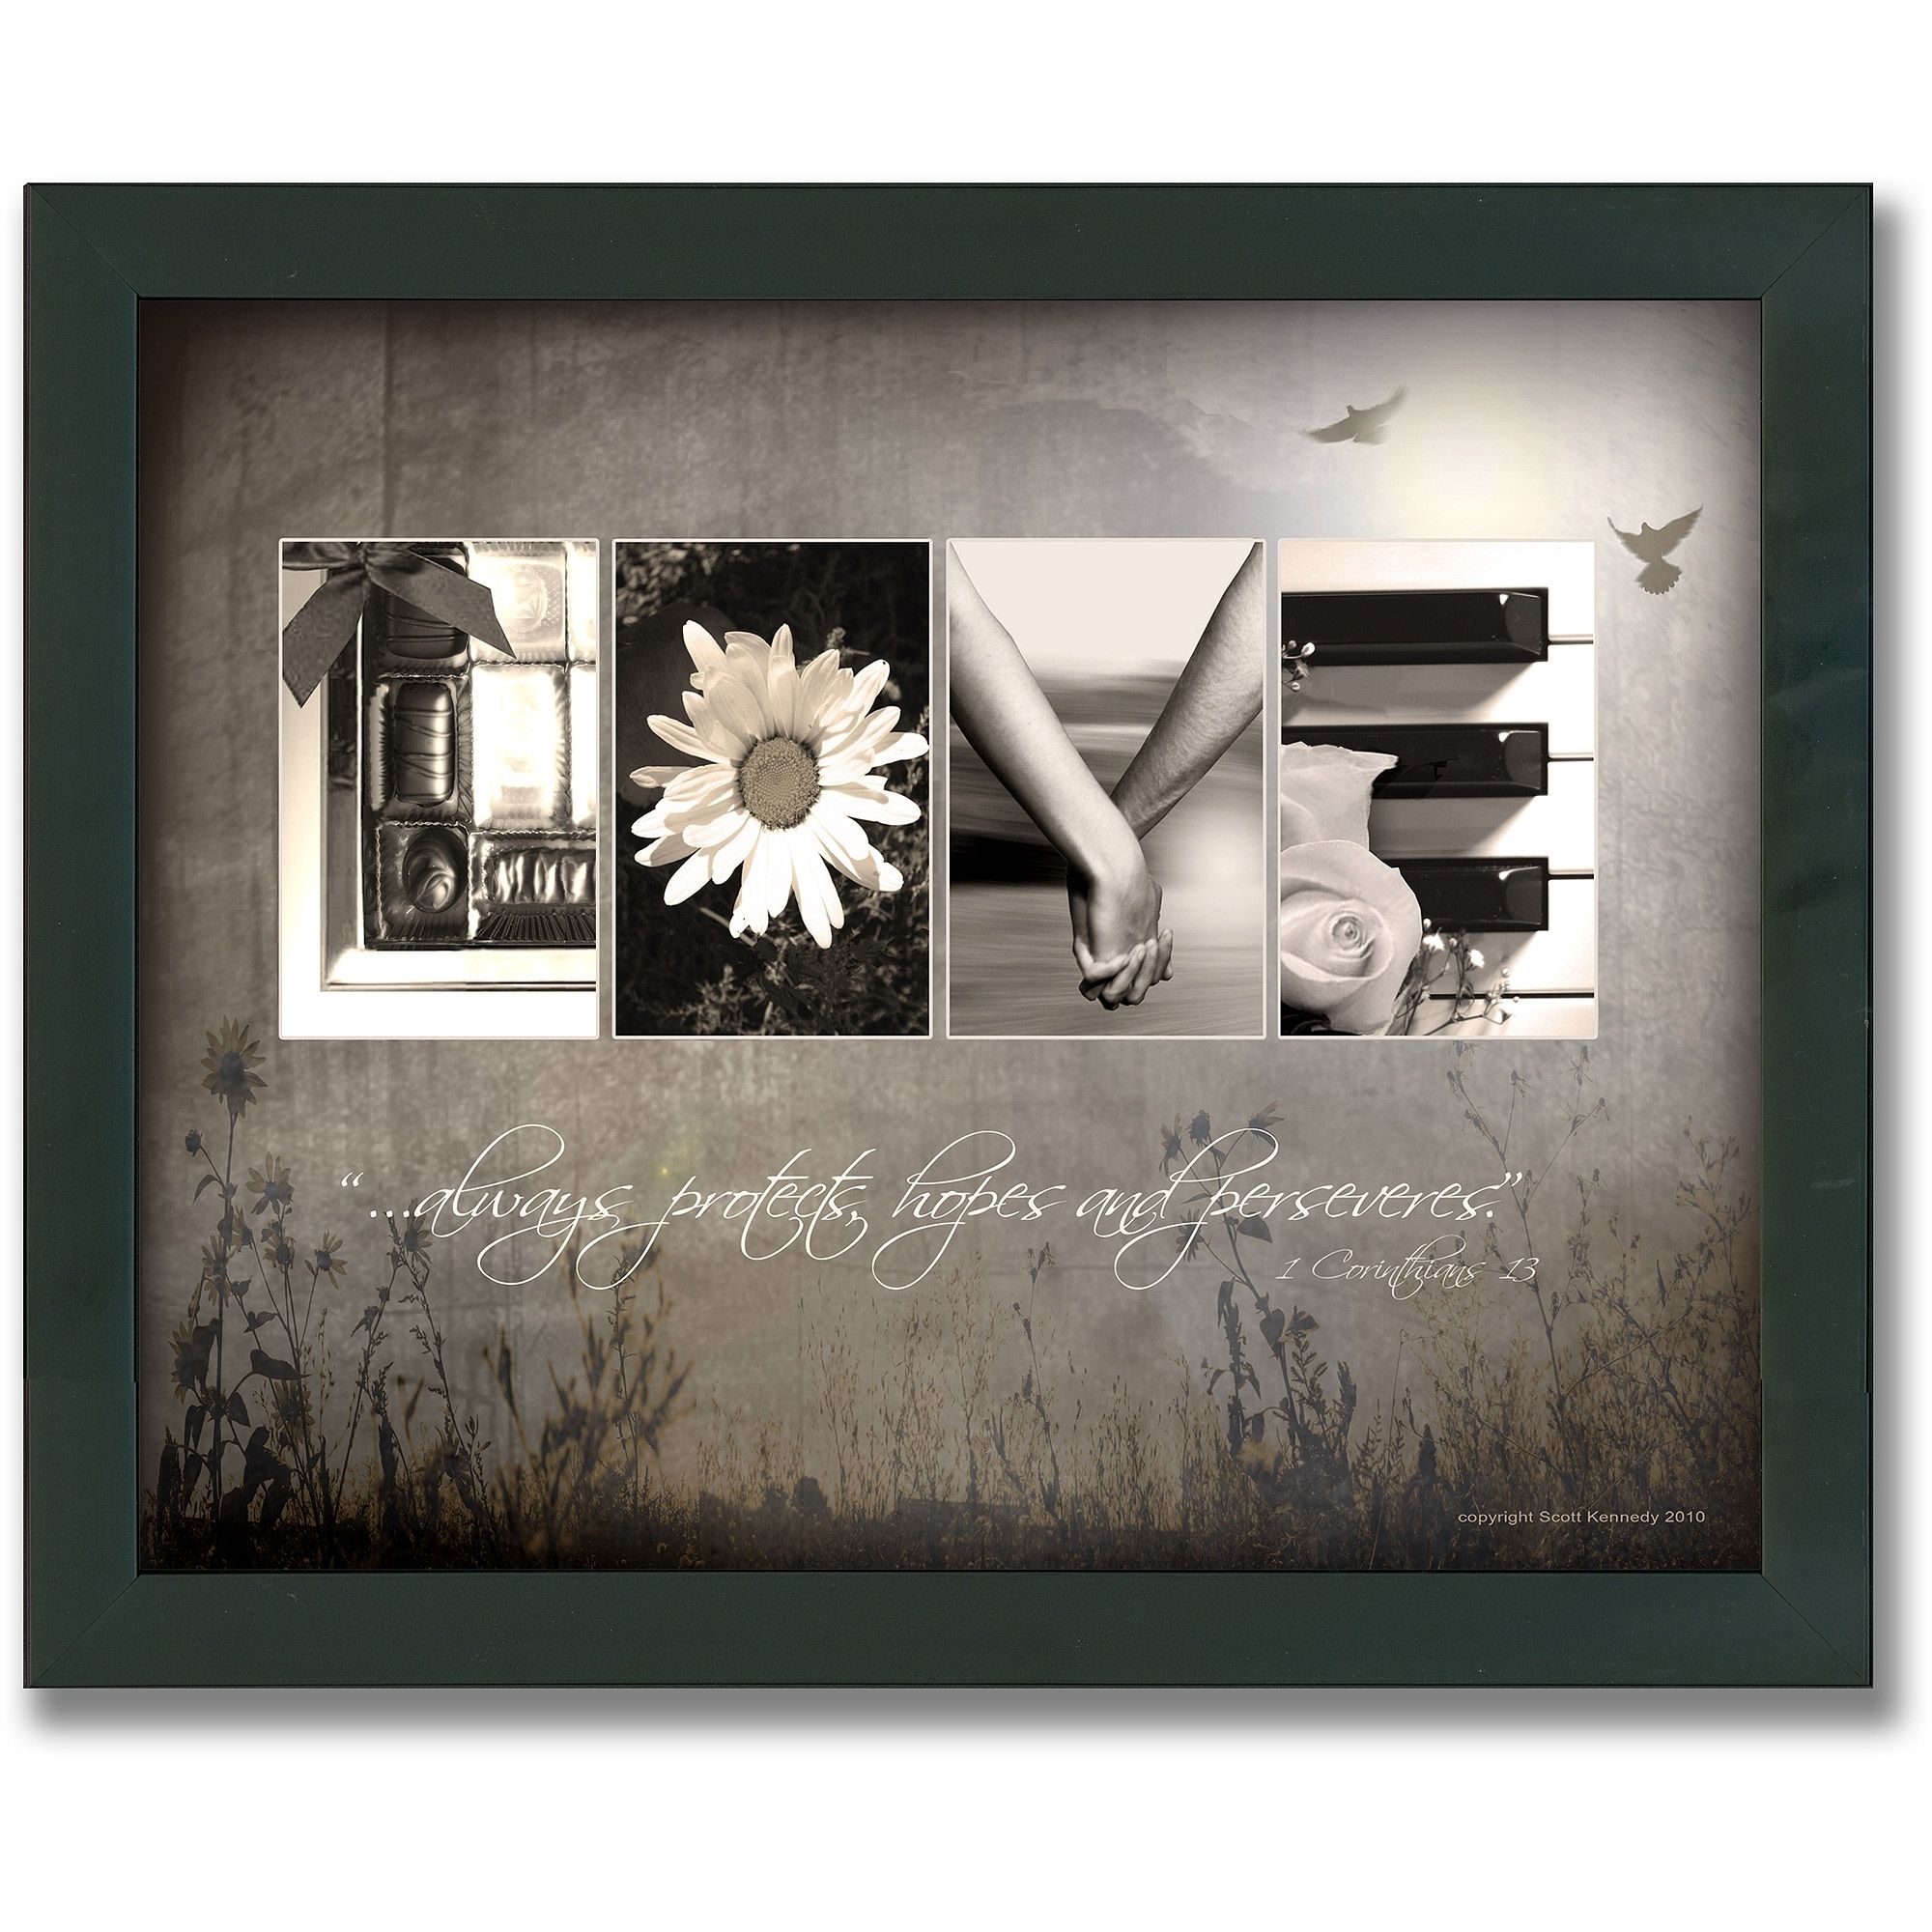 Personal Prints Love Letters Framed Canvas Wall Art – Walmart With Regard To Wall Art At Walmart (View 6 of 20)